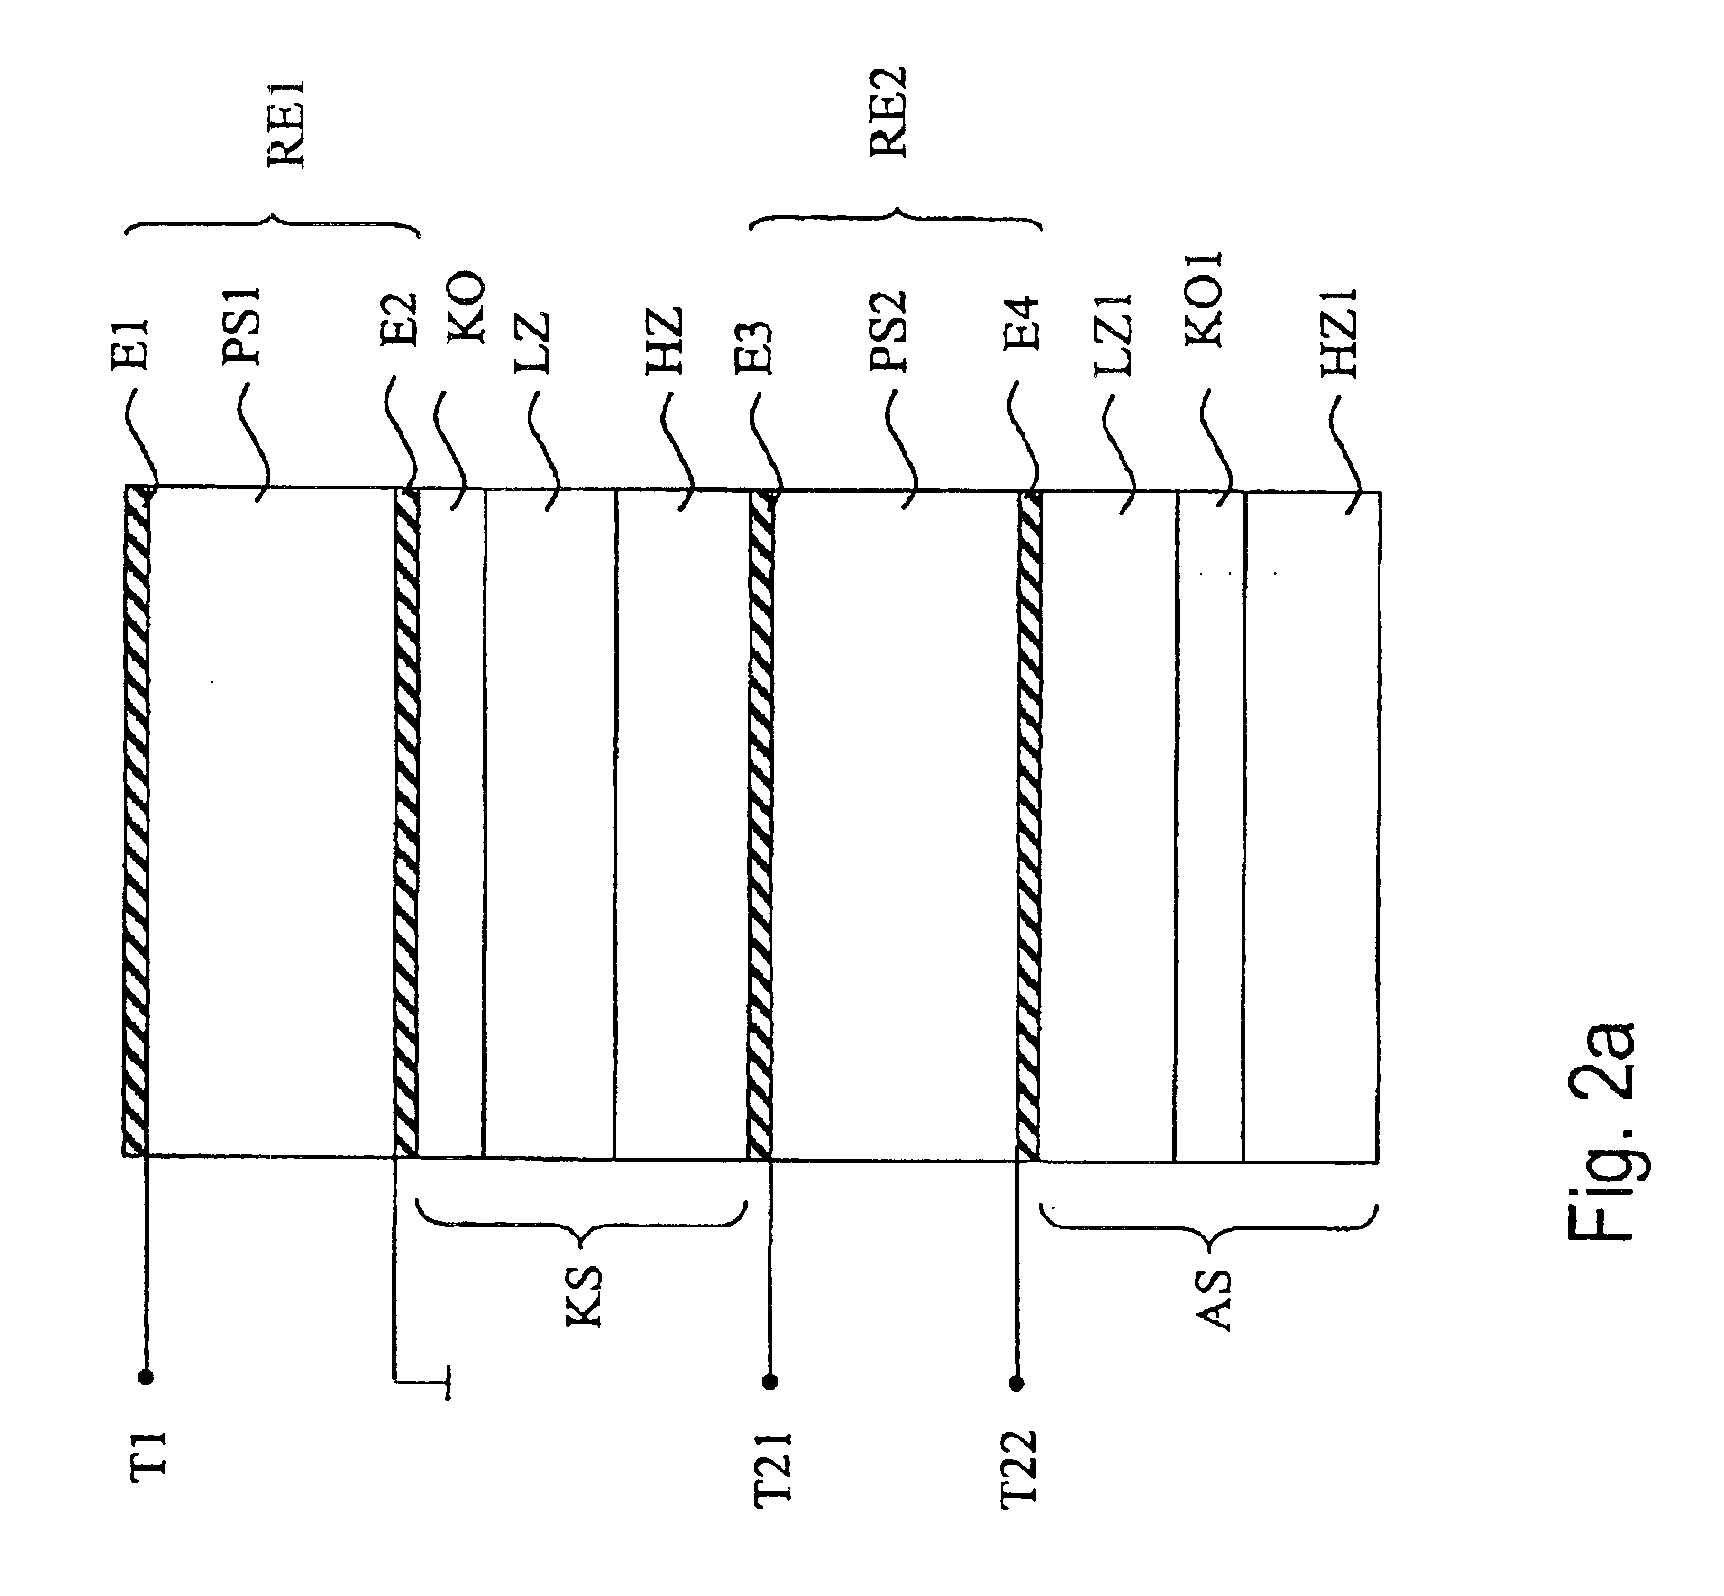 Component operating with bulk acoustic waves, and having asymmetric/symmetrical circuitry